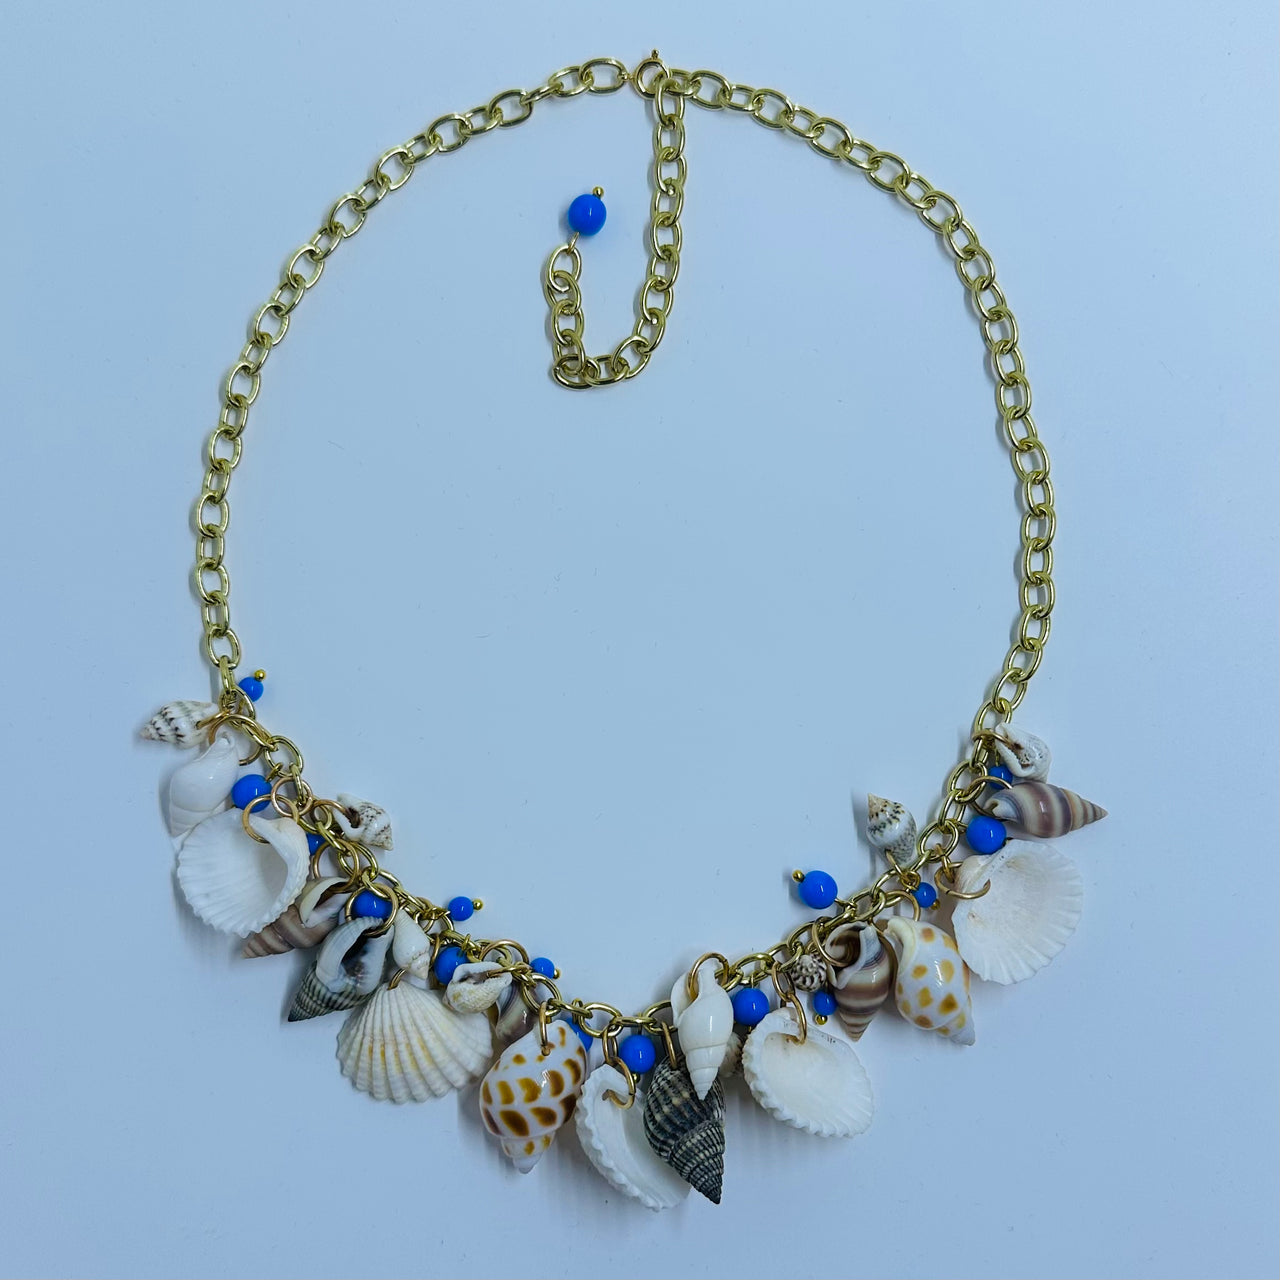 Metal Haskell Shell Striking Necklace in Blue